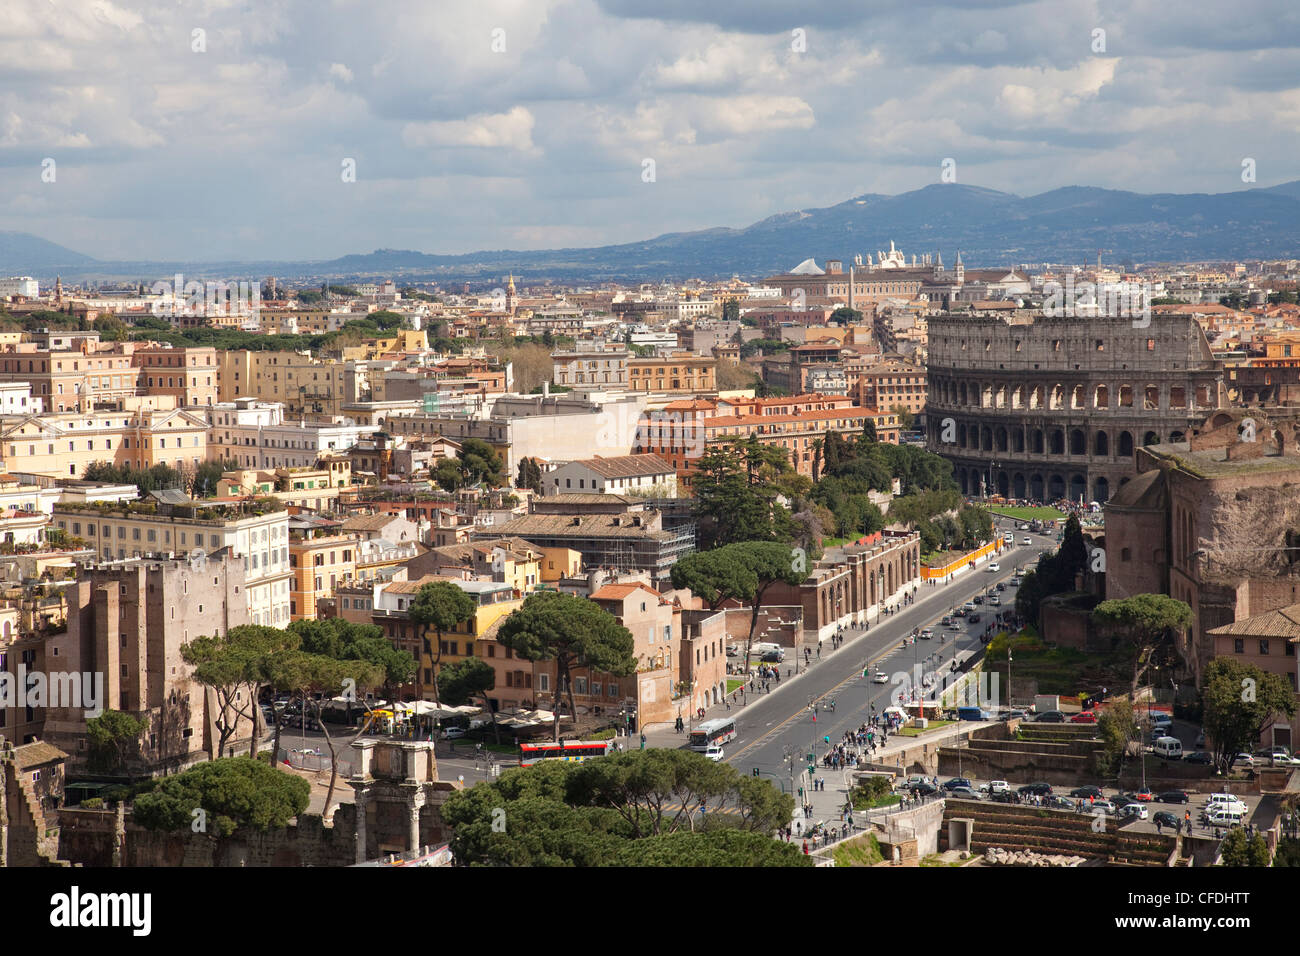 View over Rome and the Colosseum from the Altar of the Fatherland, Capitoline Hill, Rome, Lazio, Italy, Europe Stock Photo